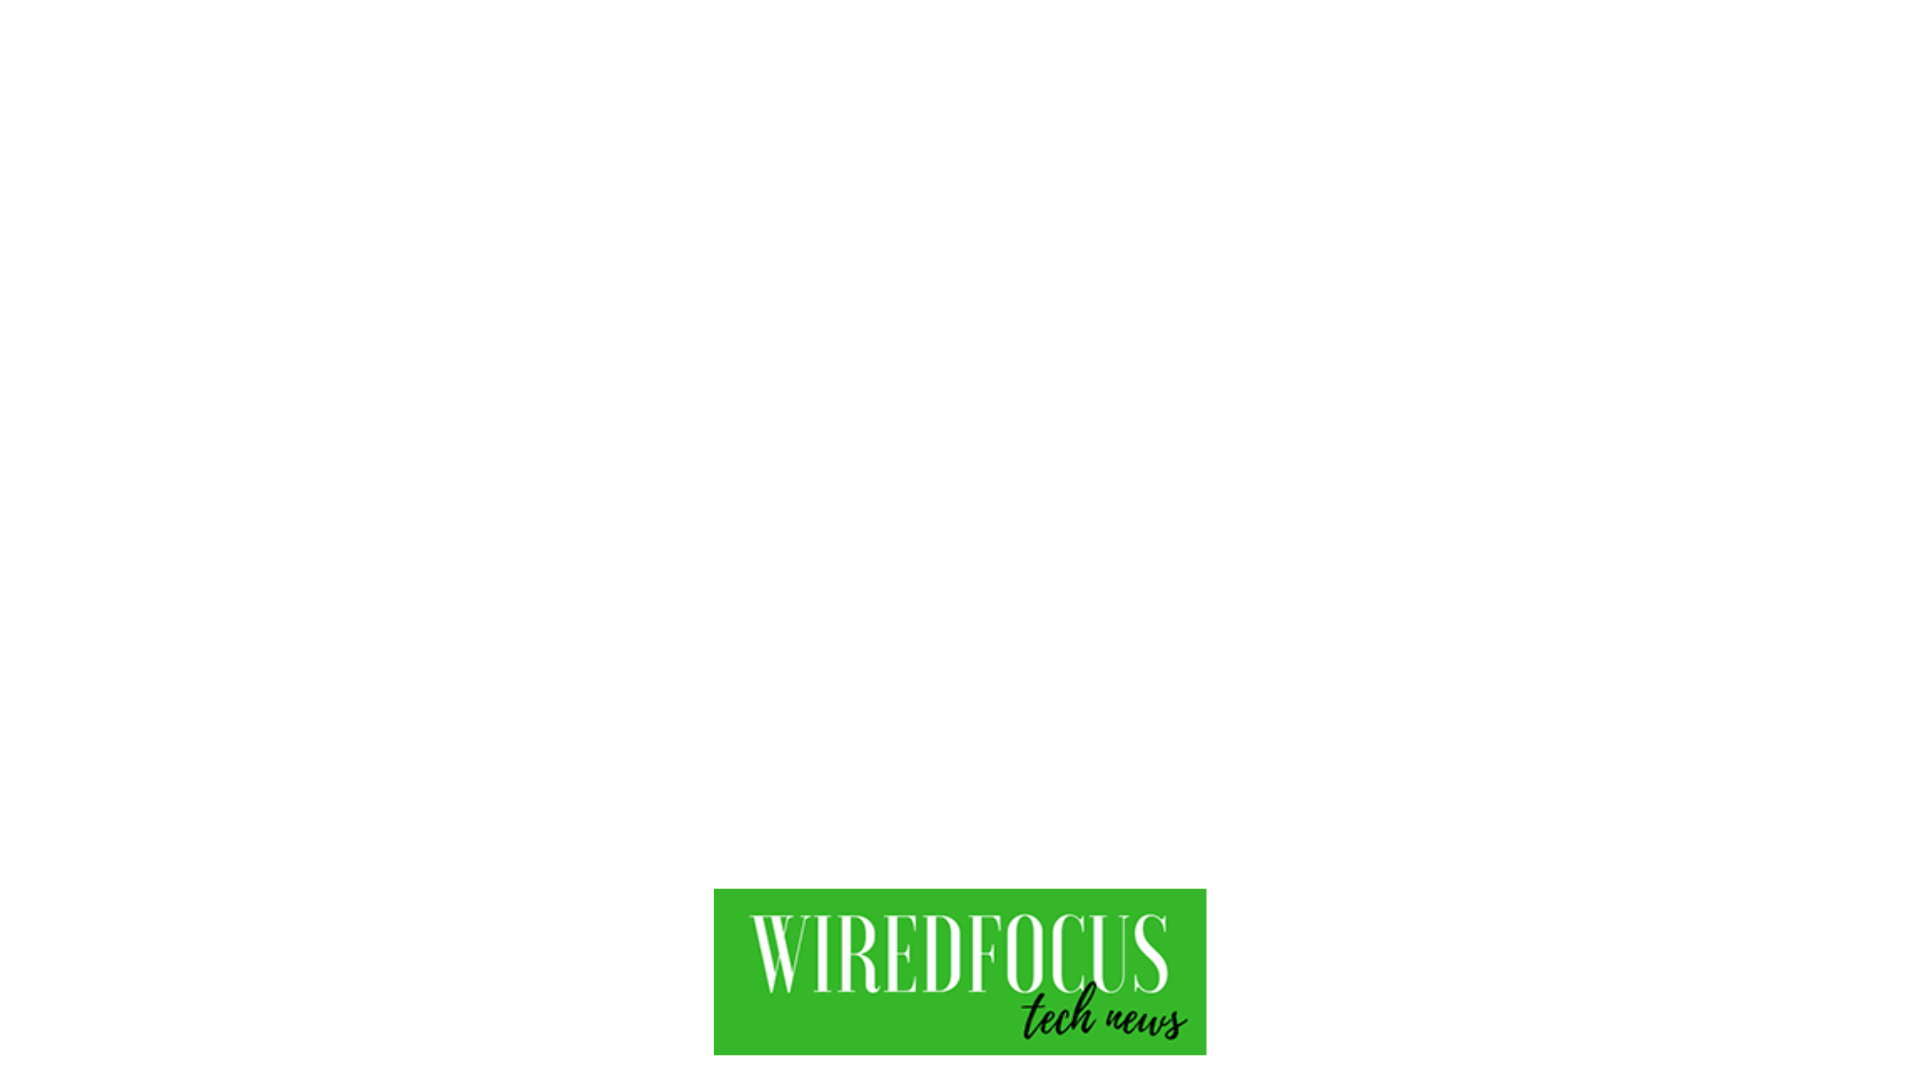 A green sign that says wired focus on a white background.